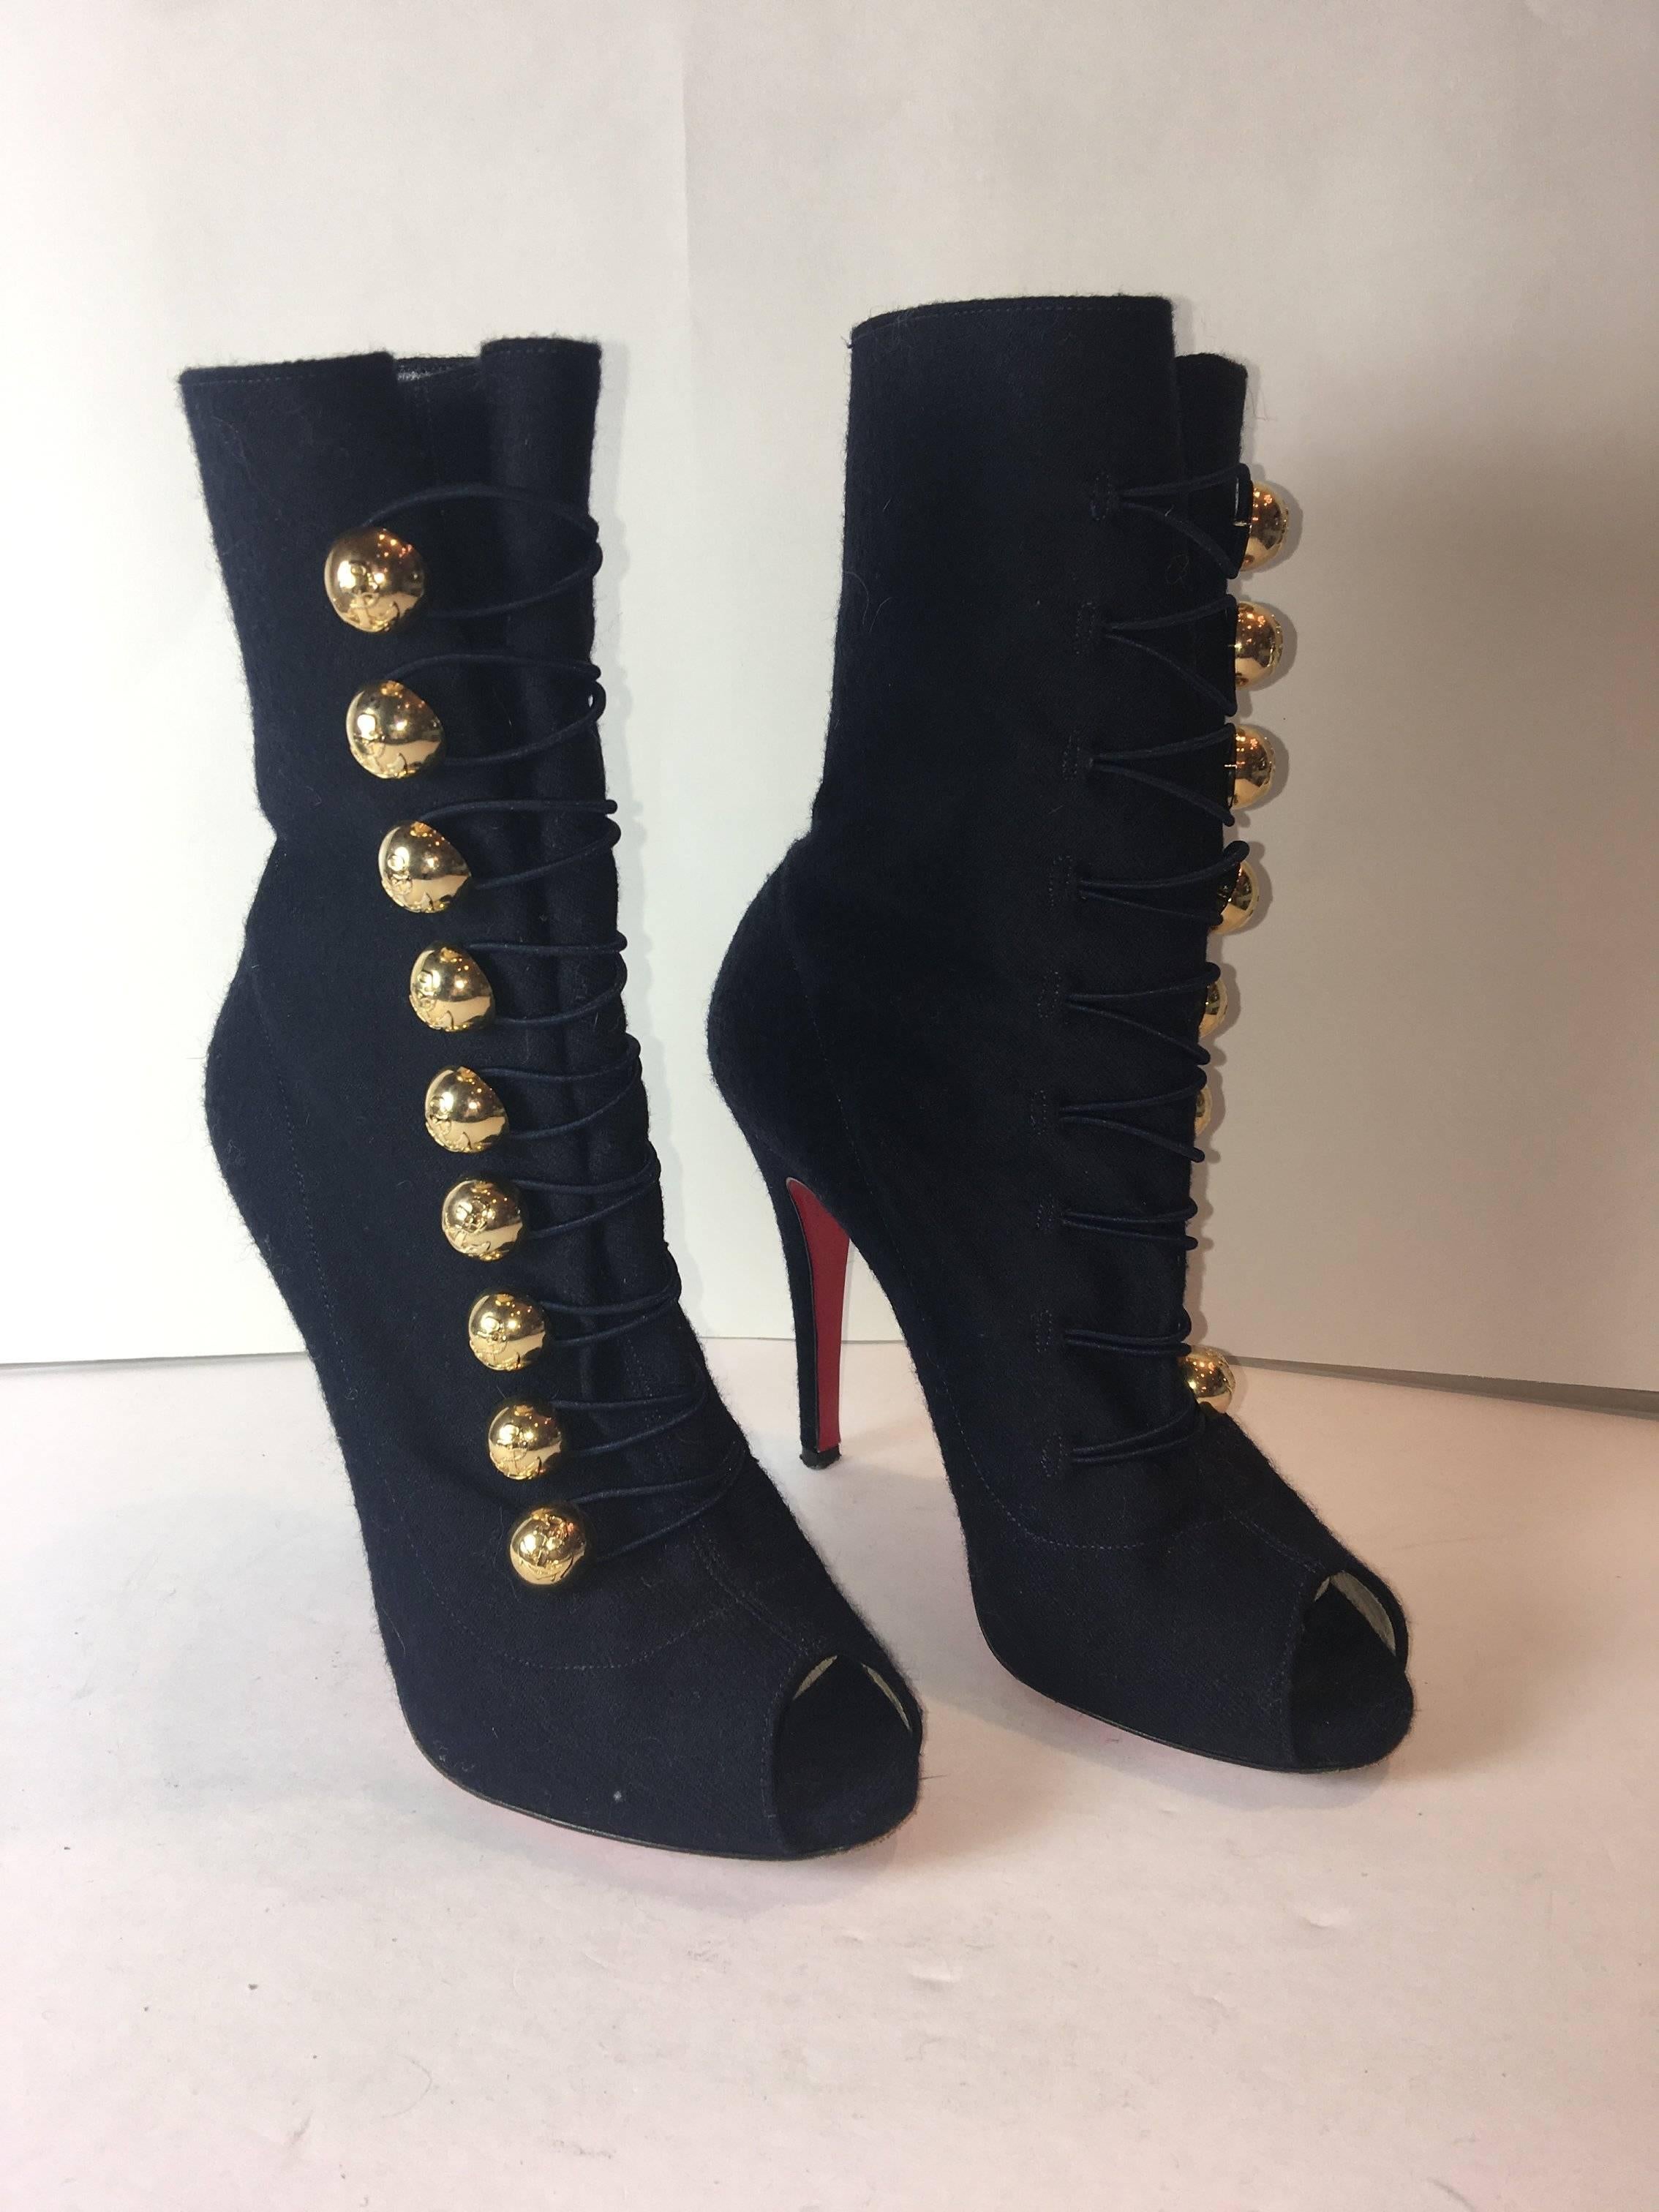 Christian Louboutin Peep Toe Mid Calf Booties in Navy Wool with Gold Toggle Buttons up the Front and Signature Red Sole.